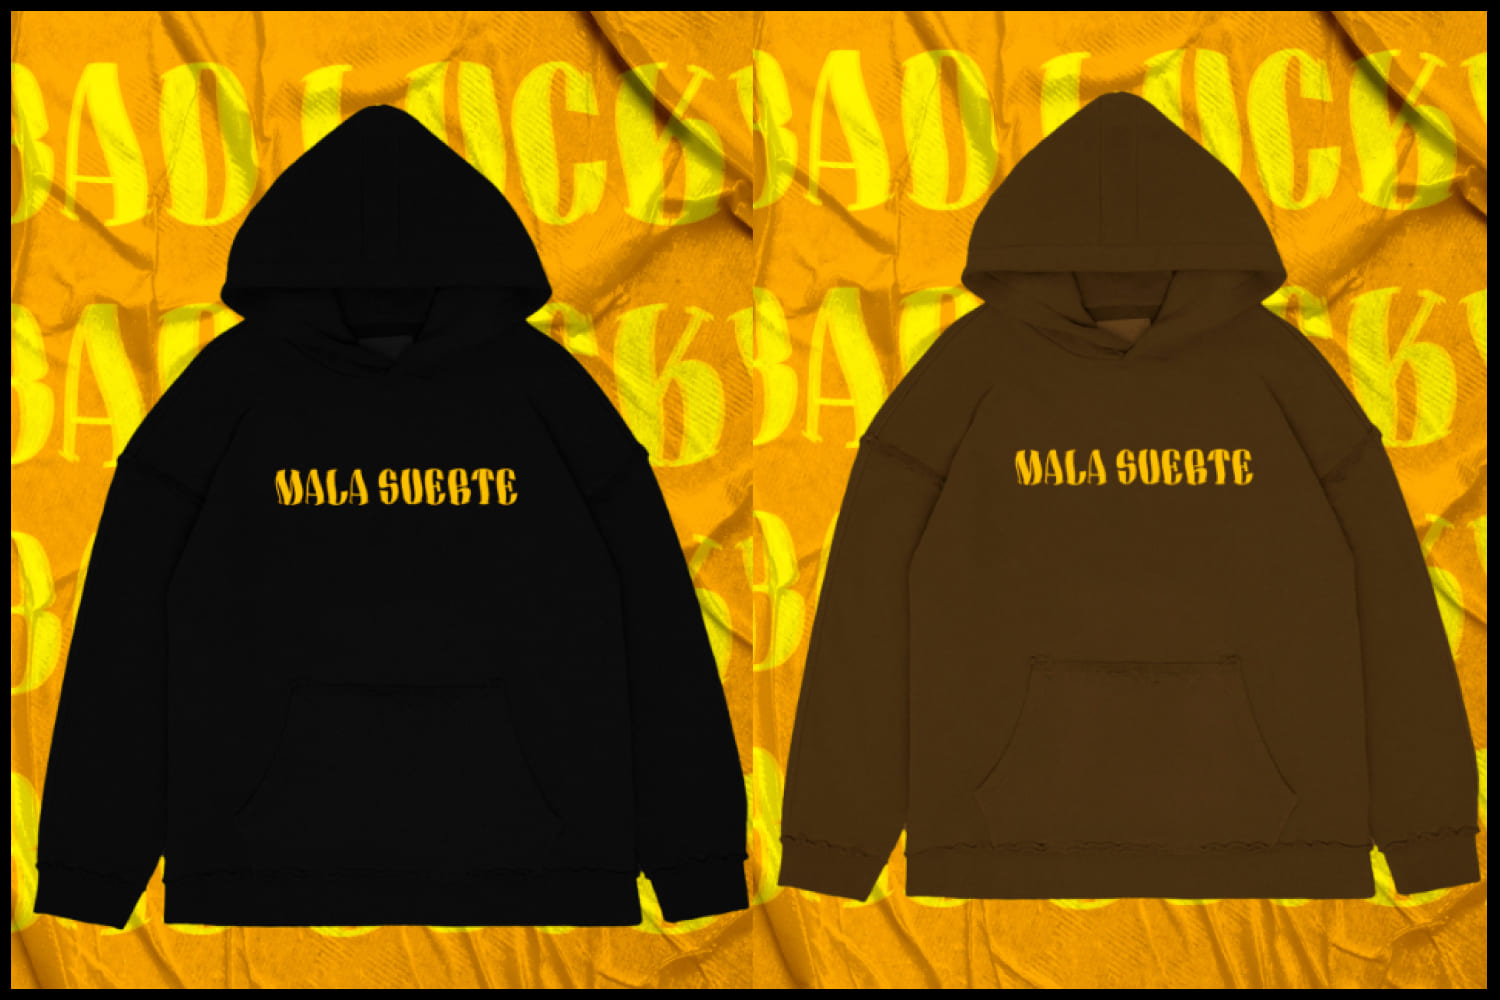 Two black and brown hoodies on a yellow background.